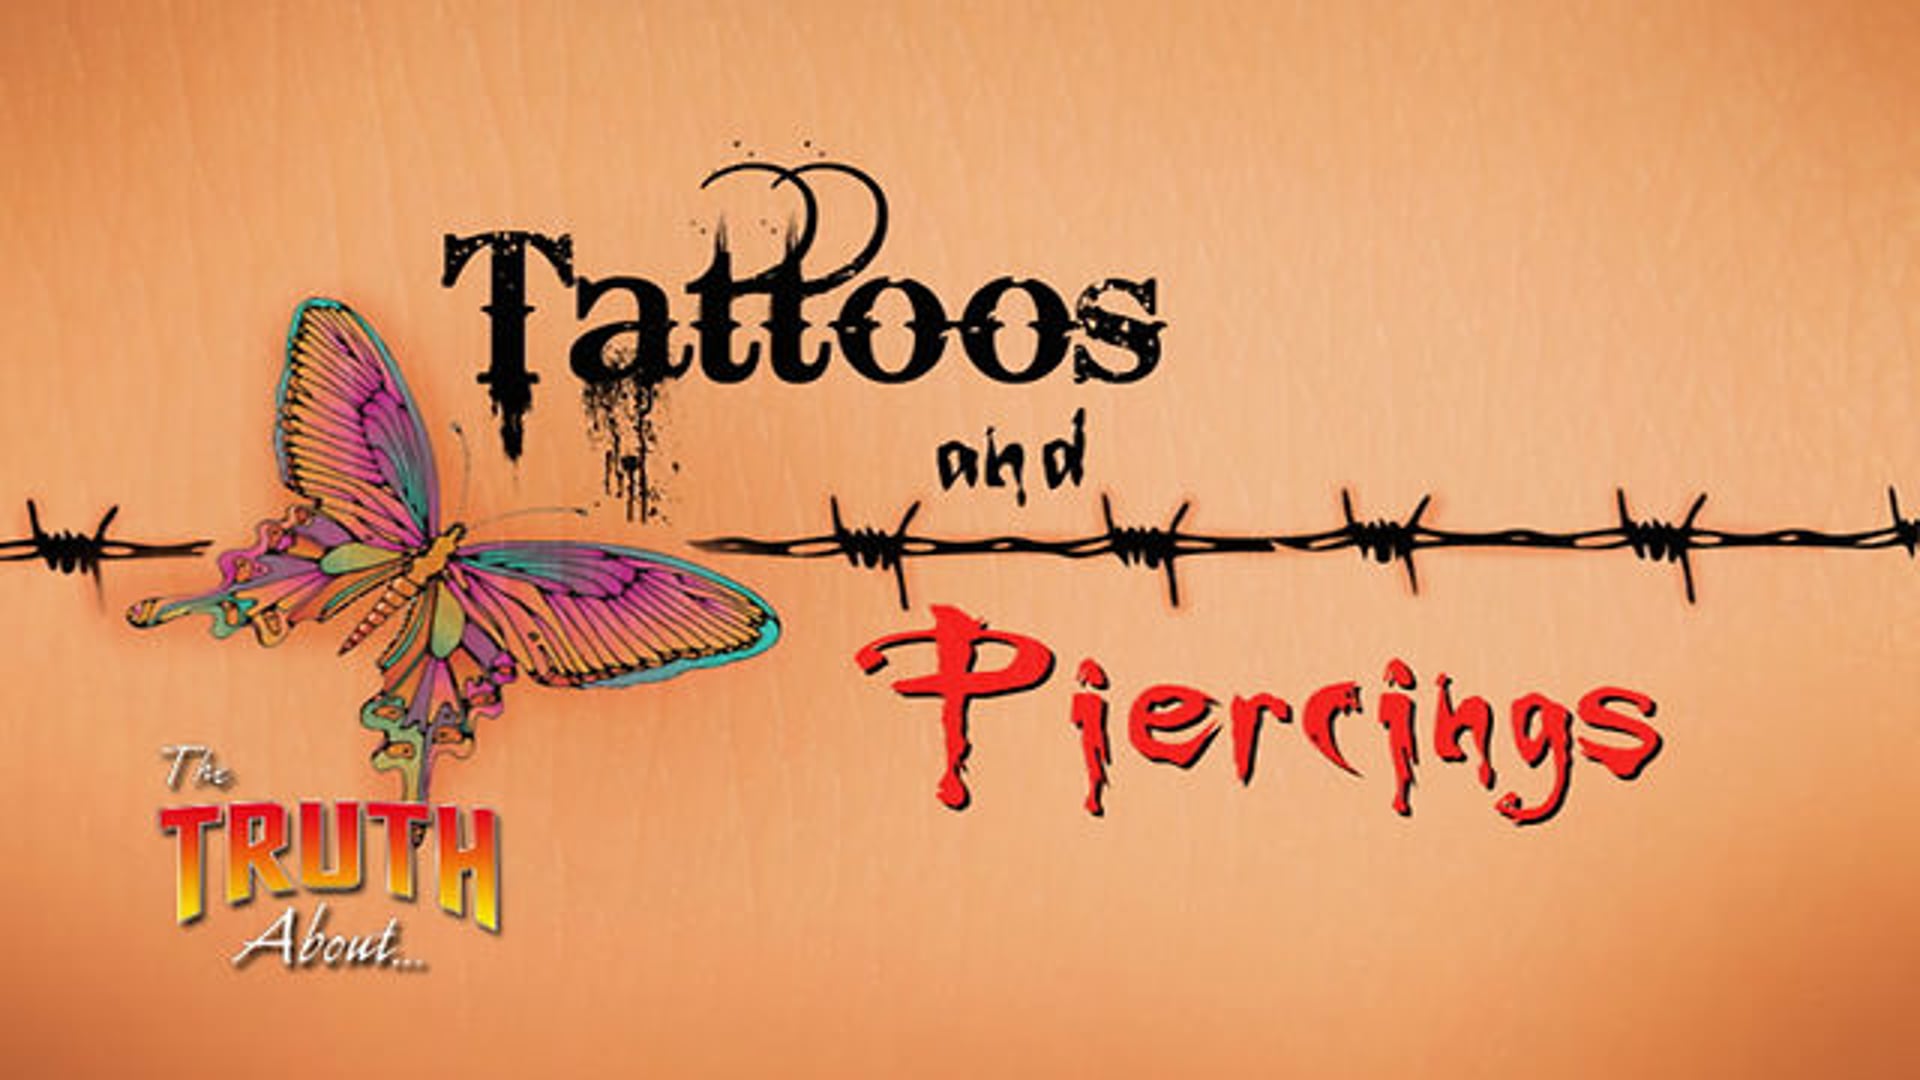 The Truth About... Tattoos and Piercings